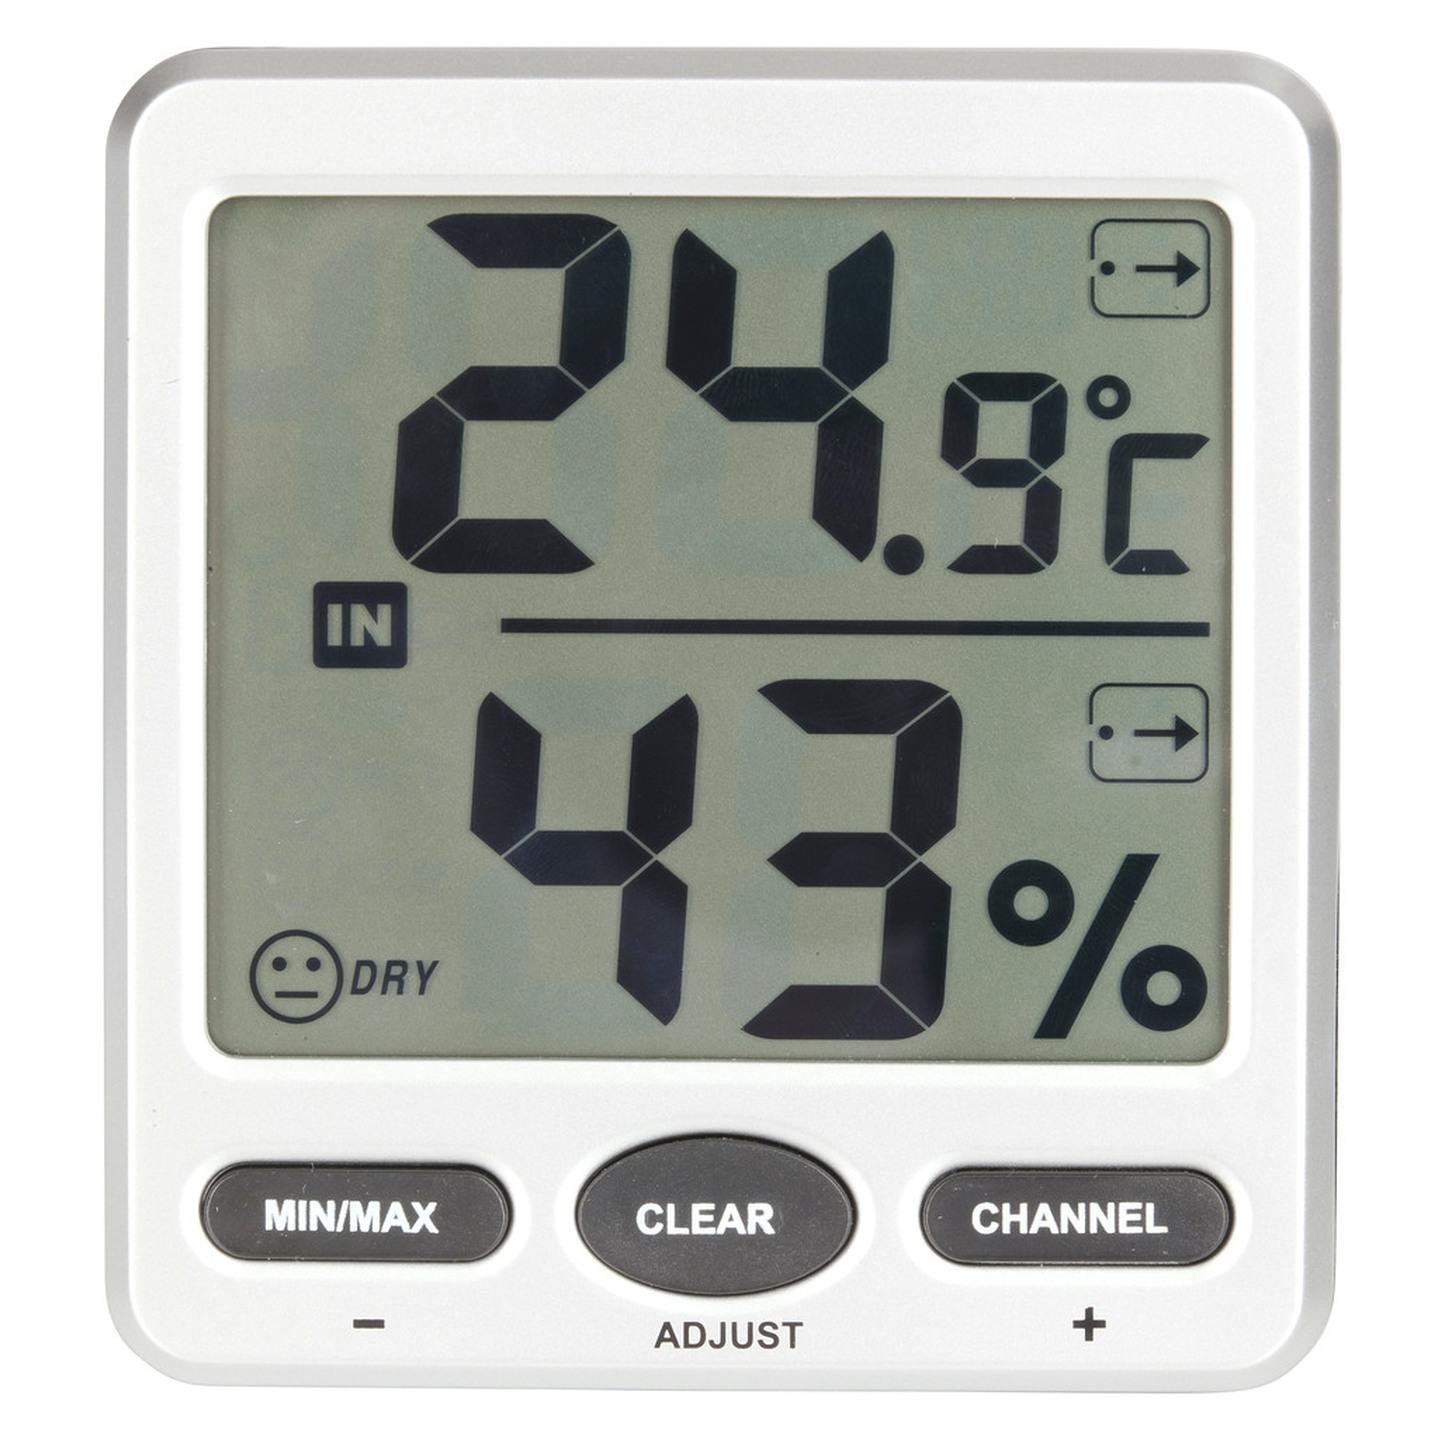 8 Channel Wireless Thermometer/Hygrometer with Jumbo LCD